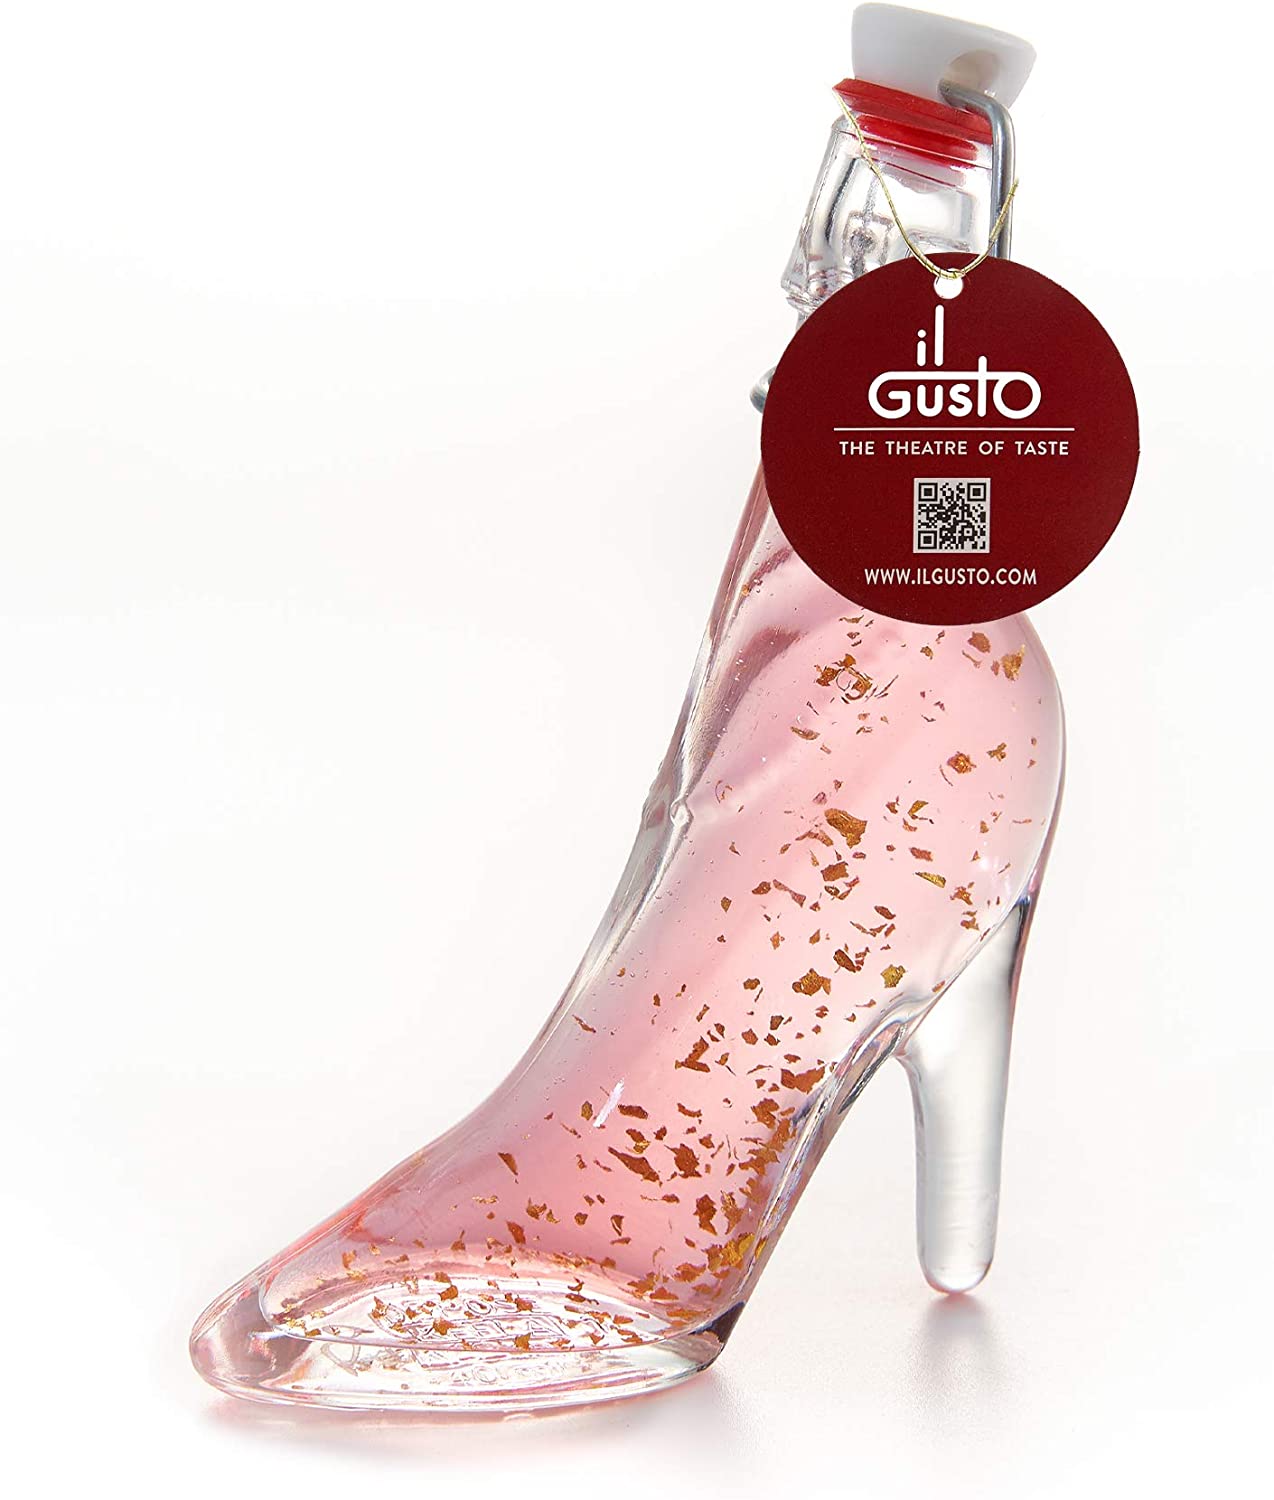 Pink Gin Gift - Lady Shoe Shaped Glass Bottle with 22 Carat Gold Flakes - 40ml - 18%